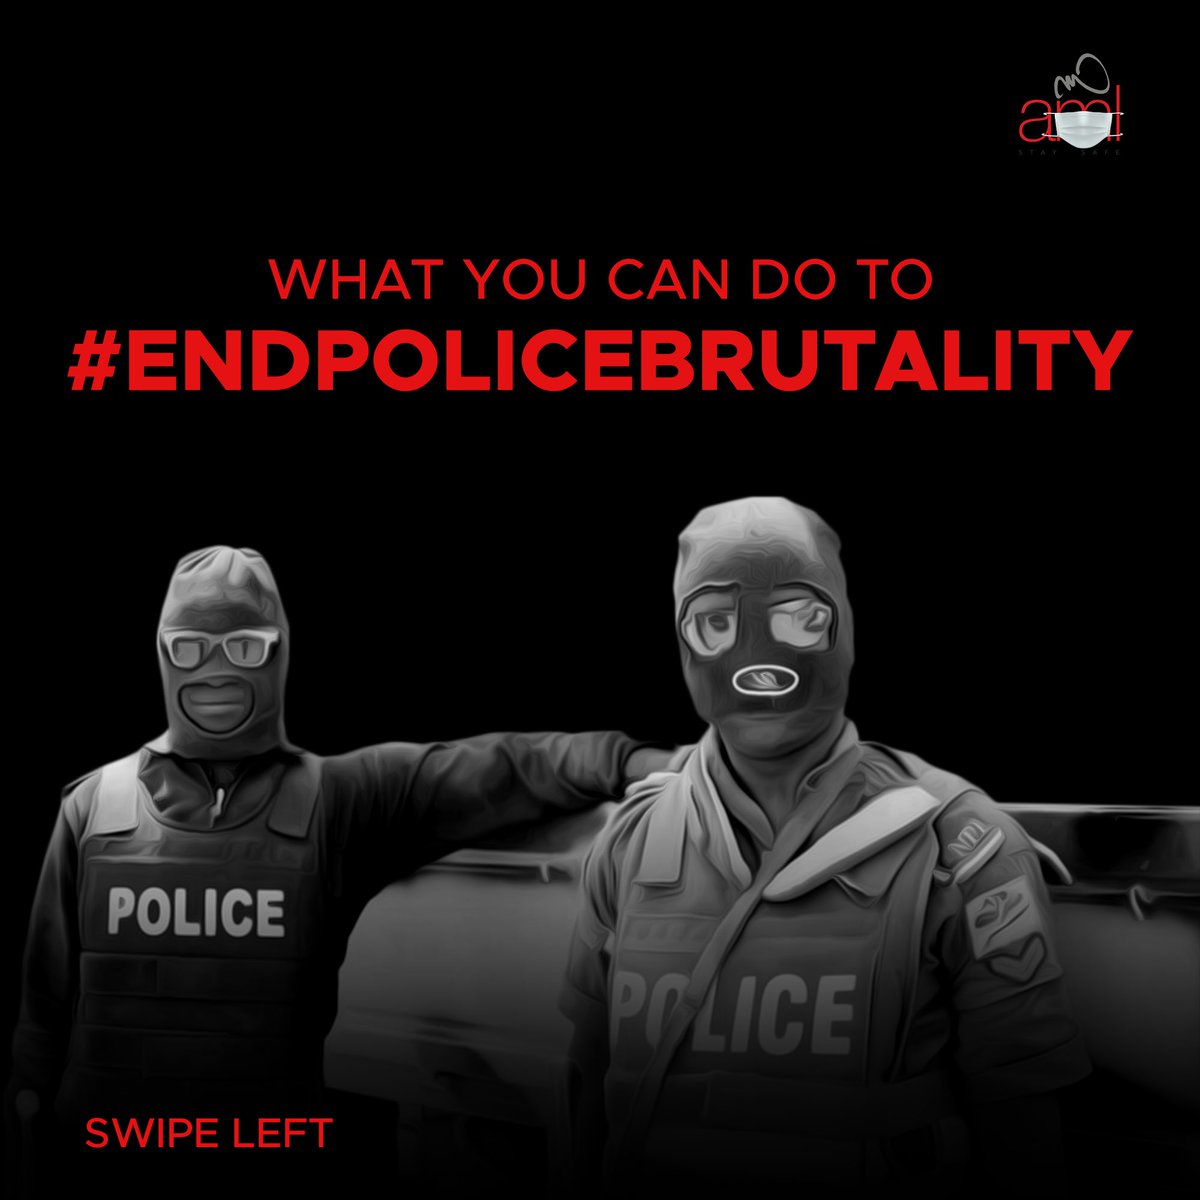 Unless the powerful are capable of learning to respect the dignity of others, we'll keep moving round in circles.All lives matter.A thread #EndPoliceBrutality